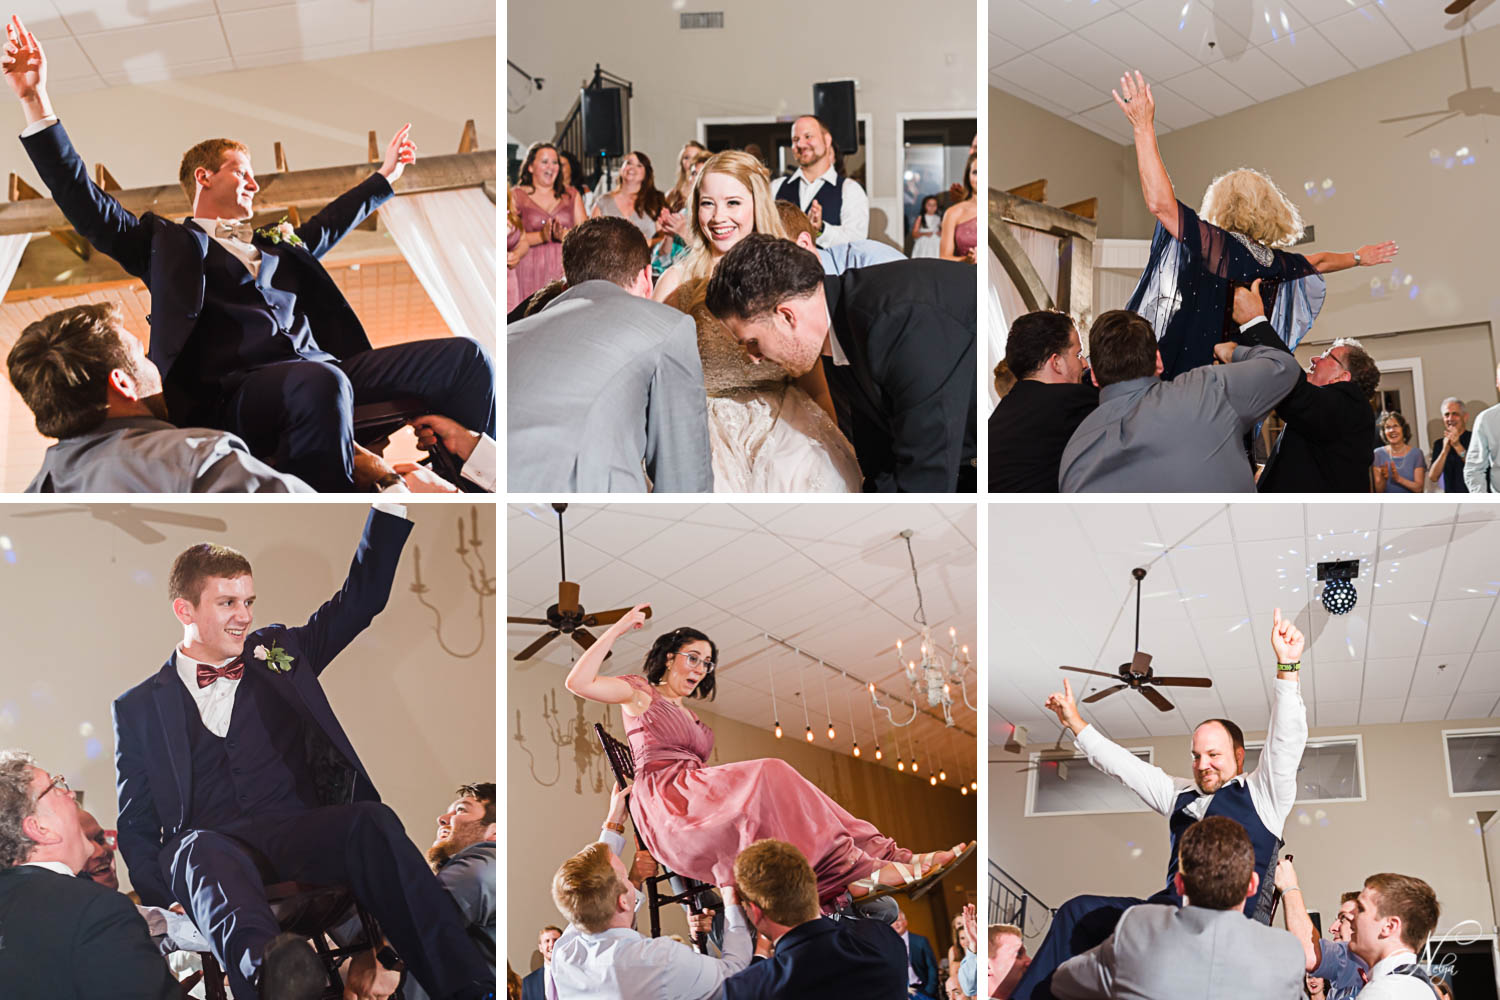 miltiple photos of wedding guests being lifted up in a chair at the wedding reception.